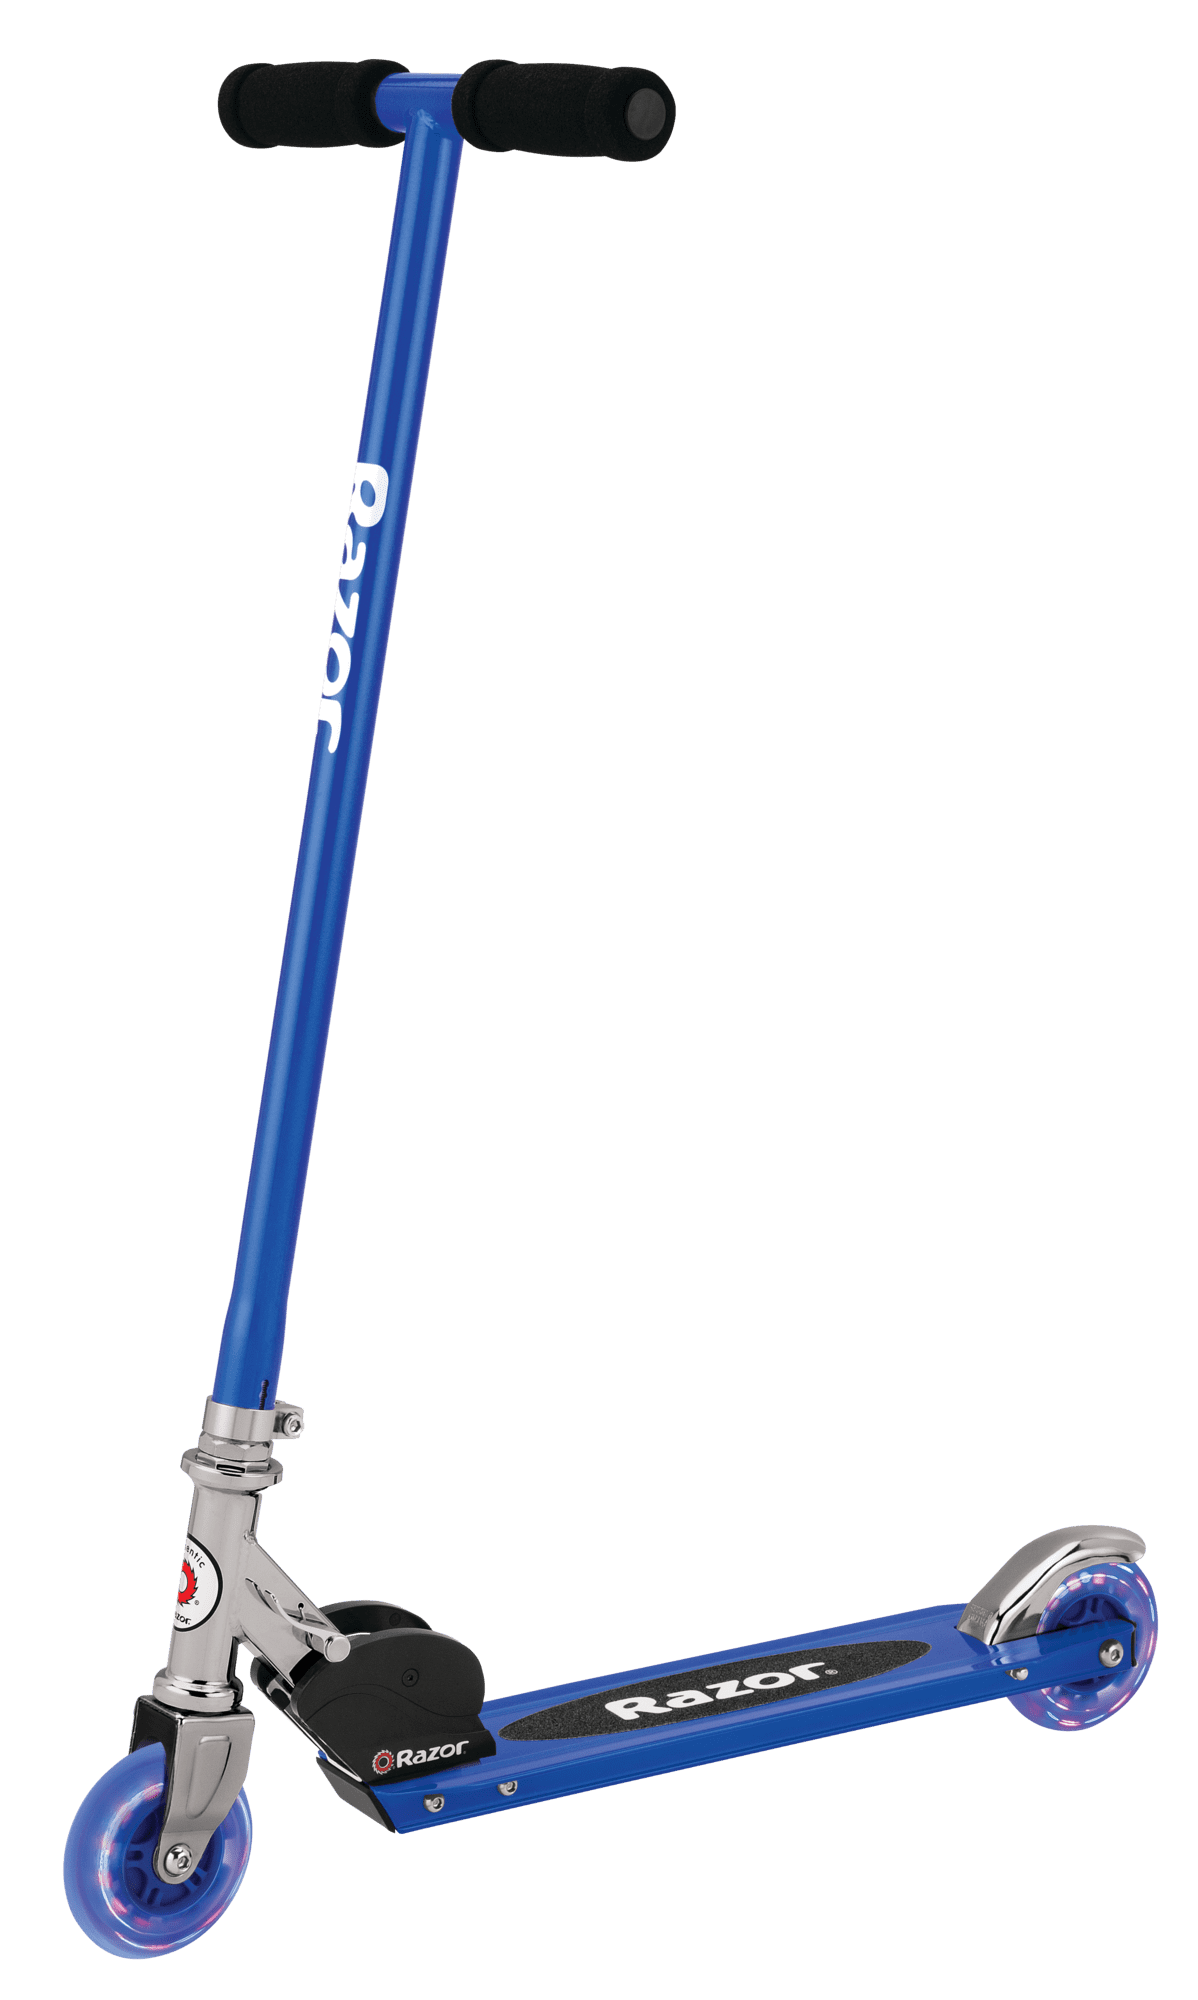 Razor S Folding Kick Scooter with Light-Up Wheel Blue, Ages 5+ and Riders Up to 110 lbs - Walmart.com